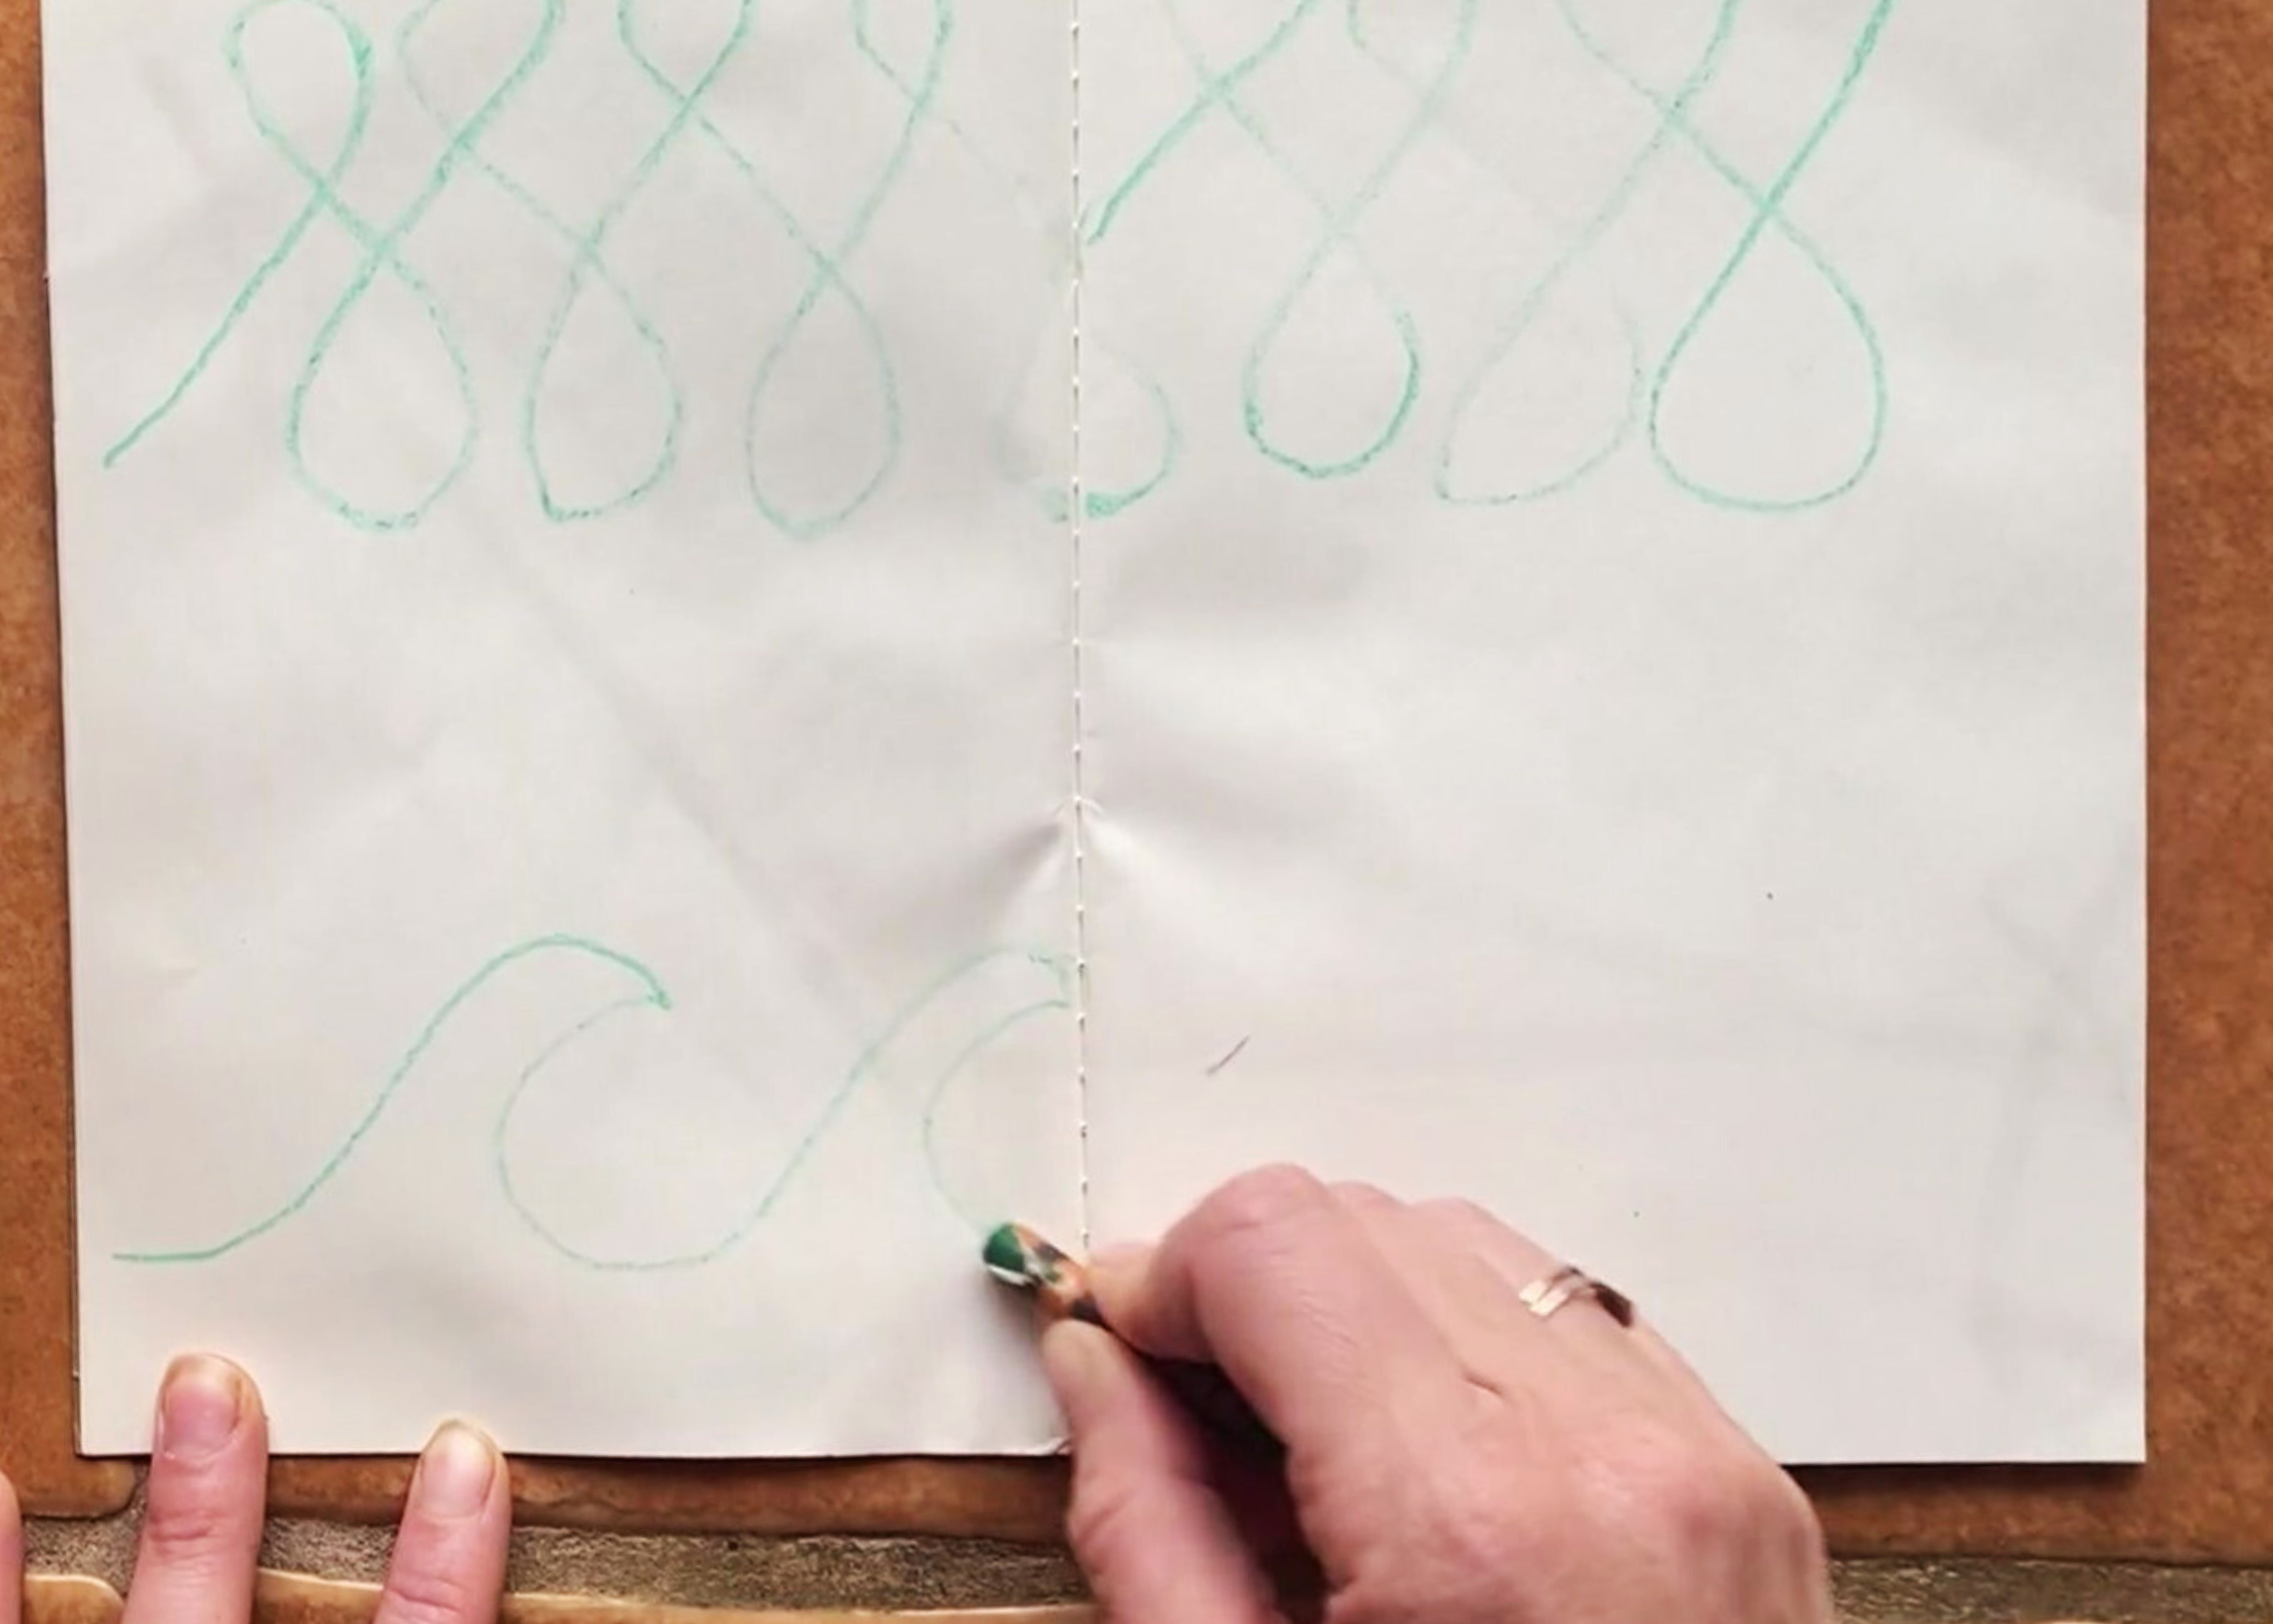 Two different green crayon drawings used to demonstrate breath and drawing. 2 creatives way to build presence.